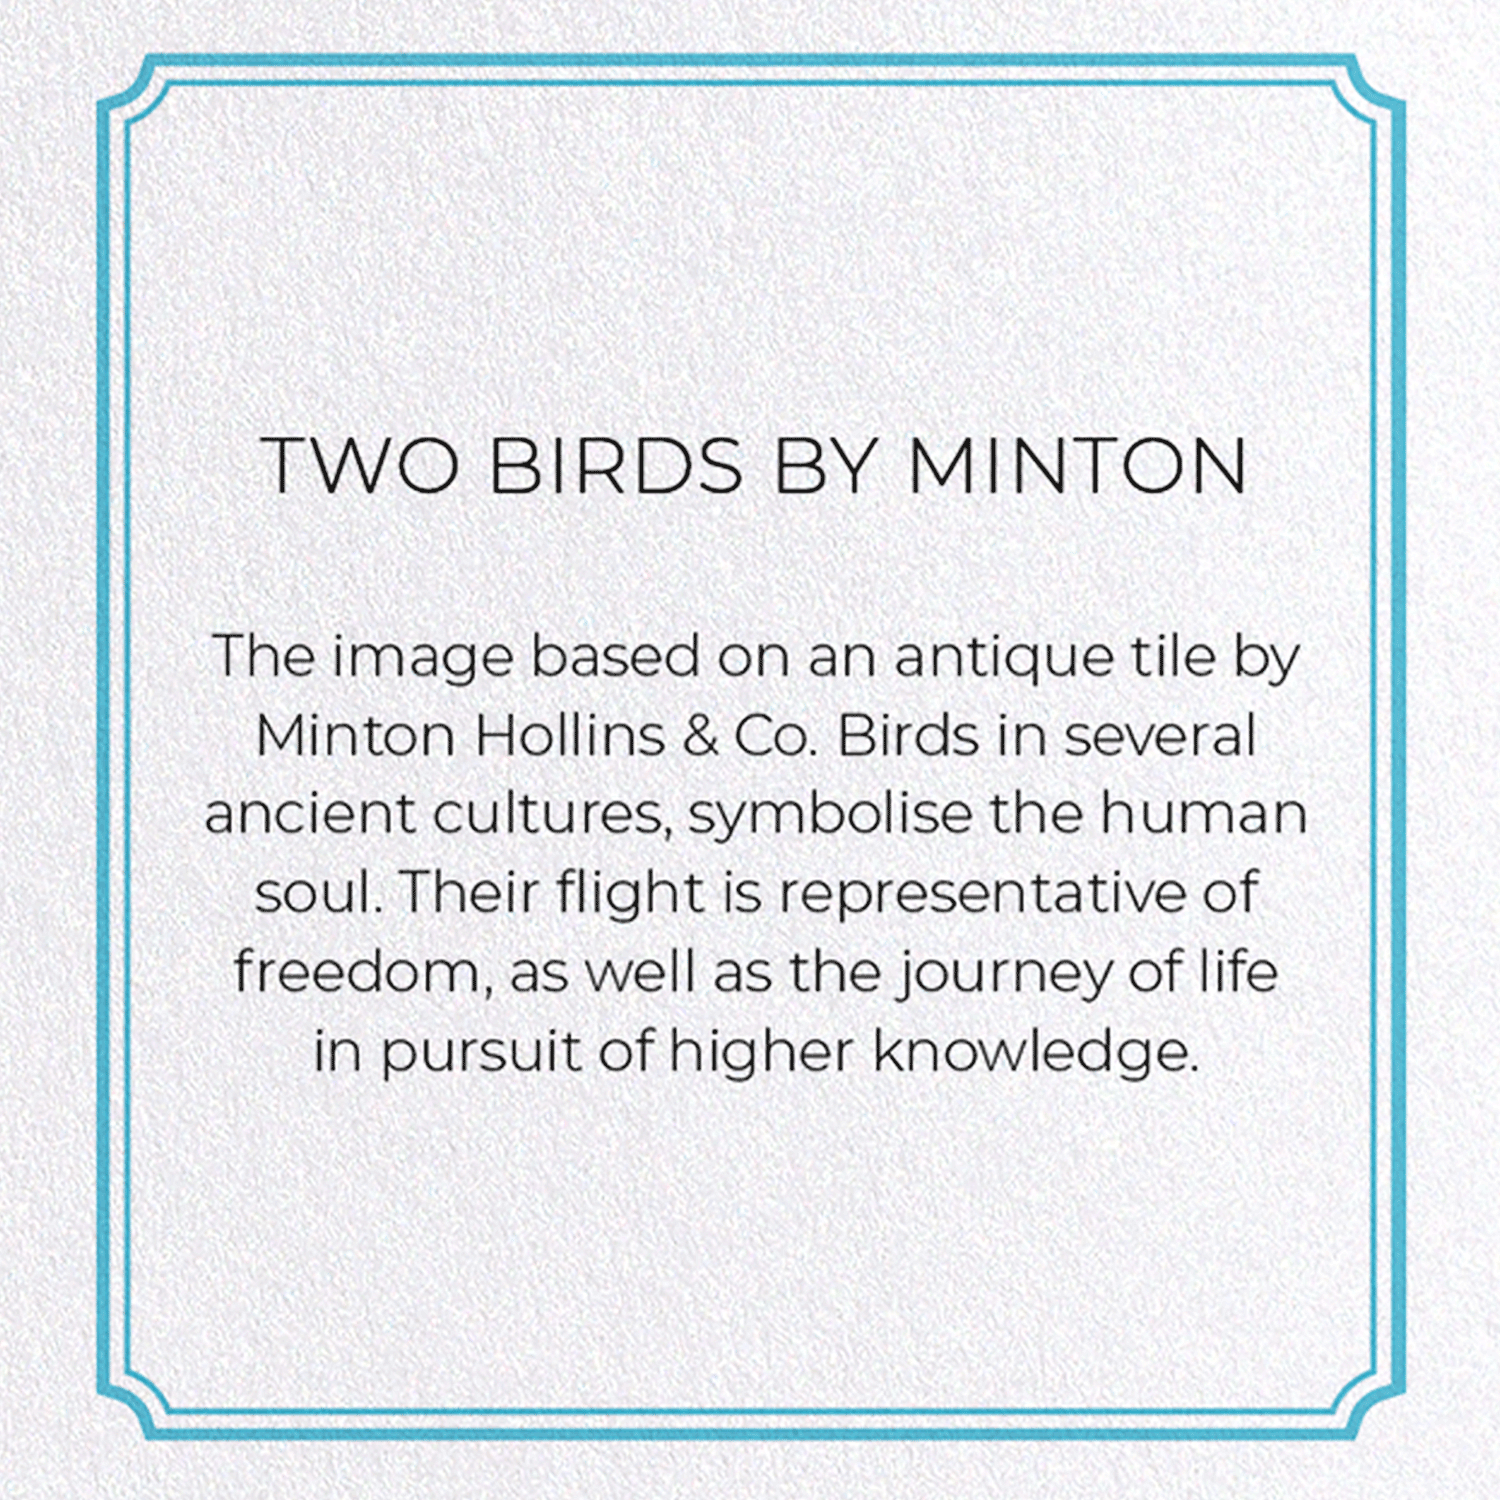 TWO BIRDS BY MINTON